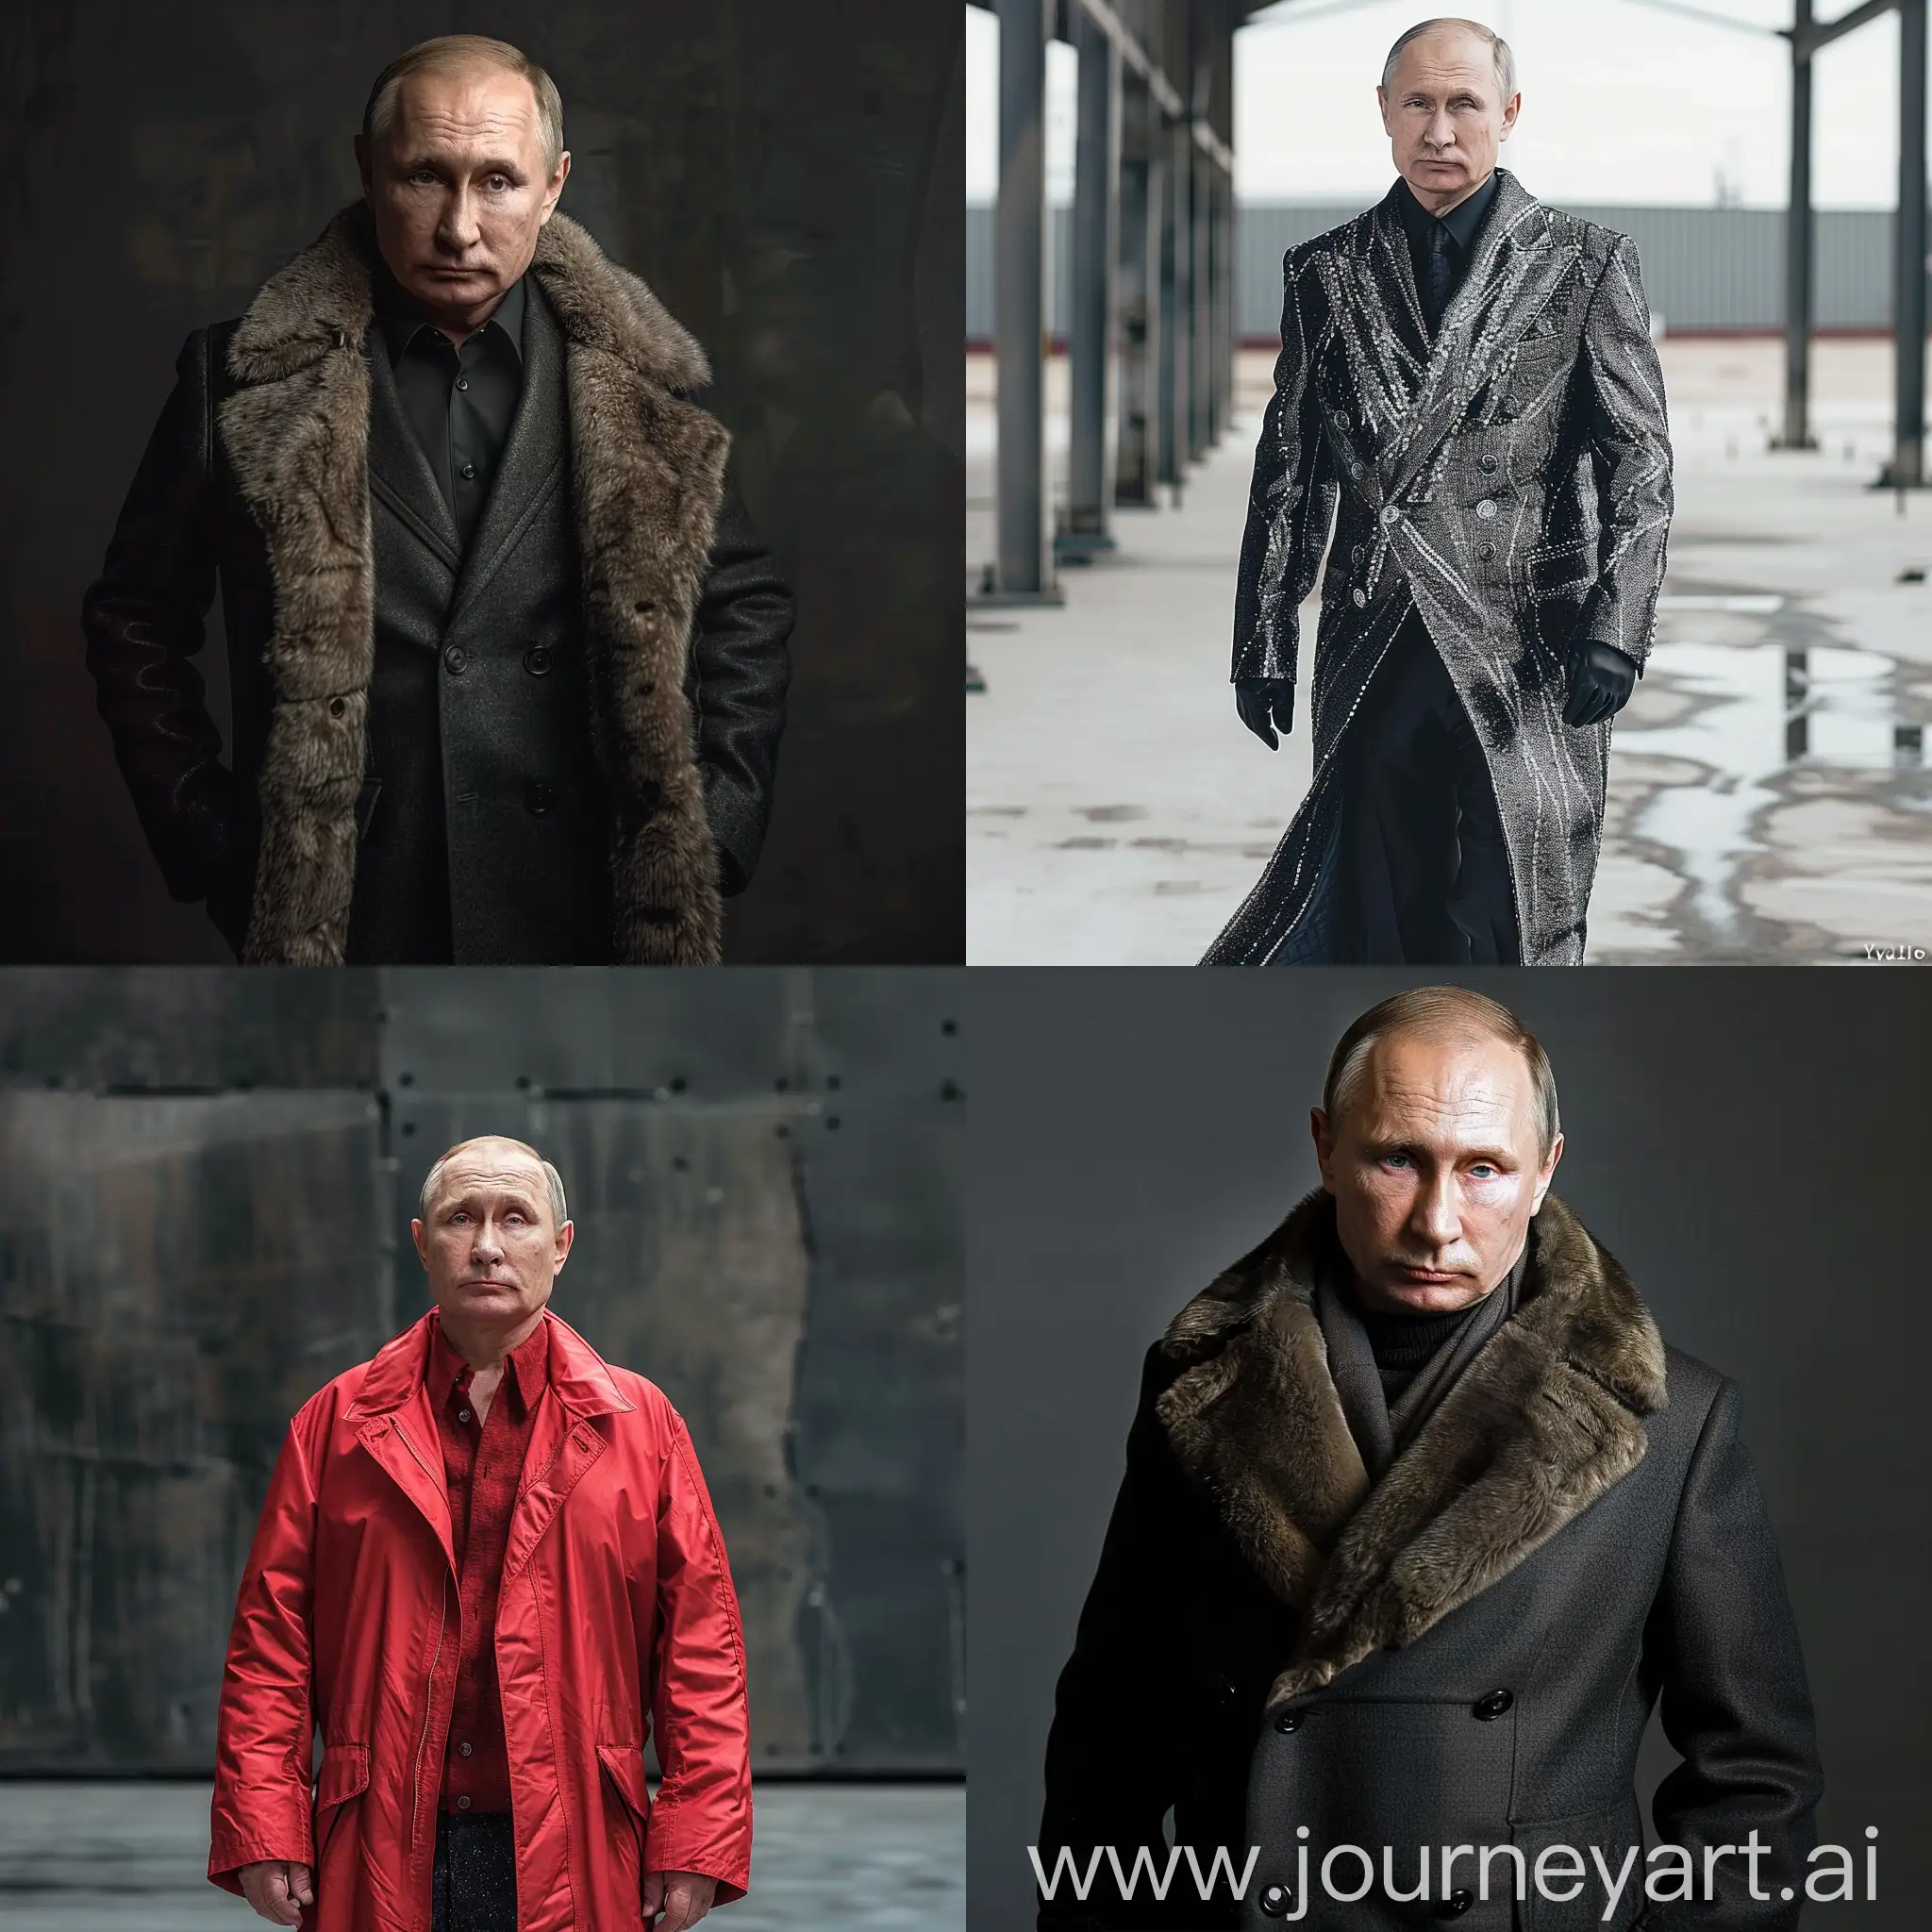  vladimir putin in clothes of rick owens and raf simons